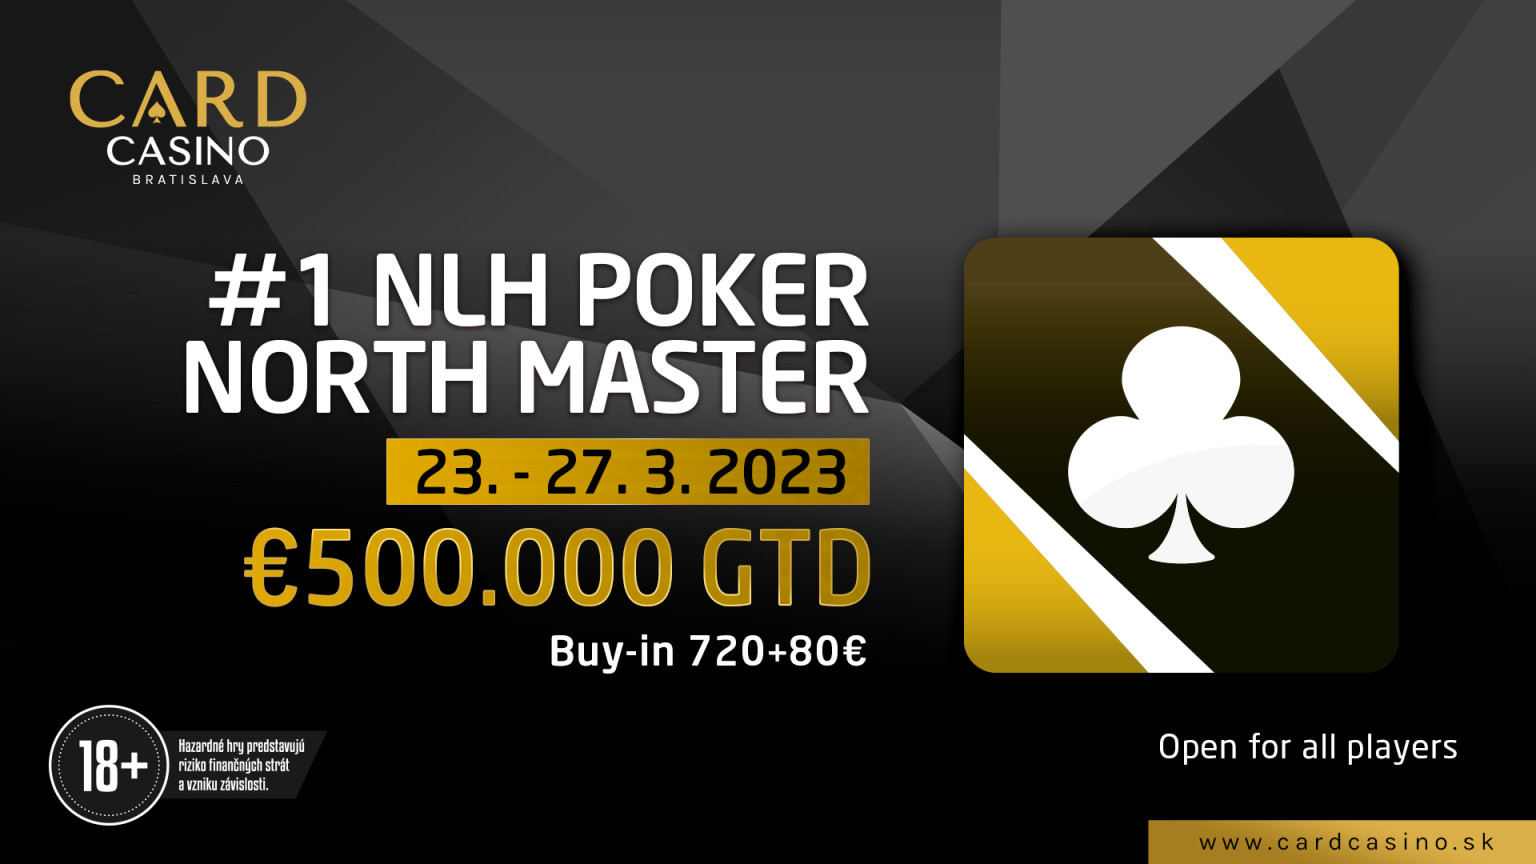 The tournament with the biggest guarantee is coming up. The €500,000 POKER NORTH MASTER will be played in Cardo!